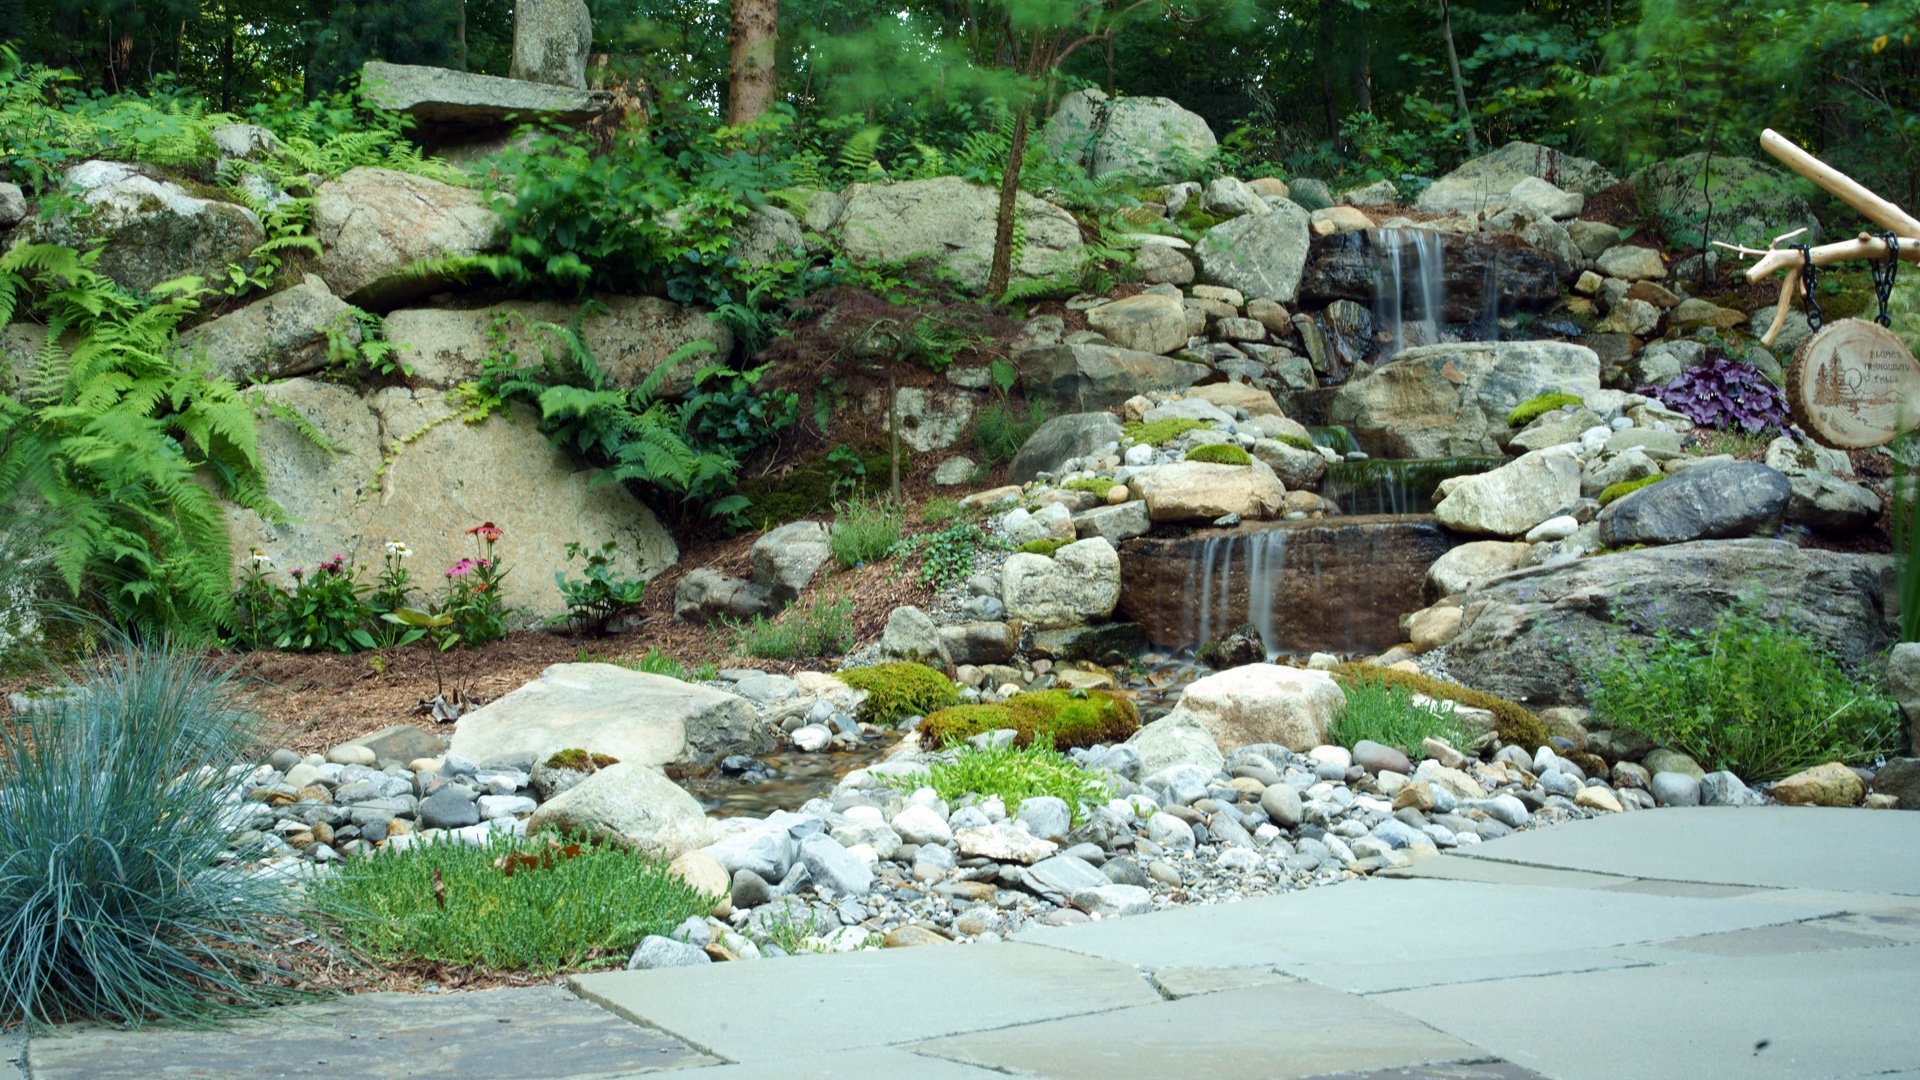 What can I do with all of these rocks? | Sierra Landscape Management, LLC